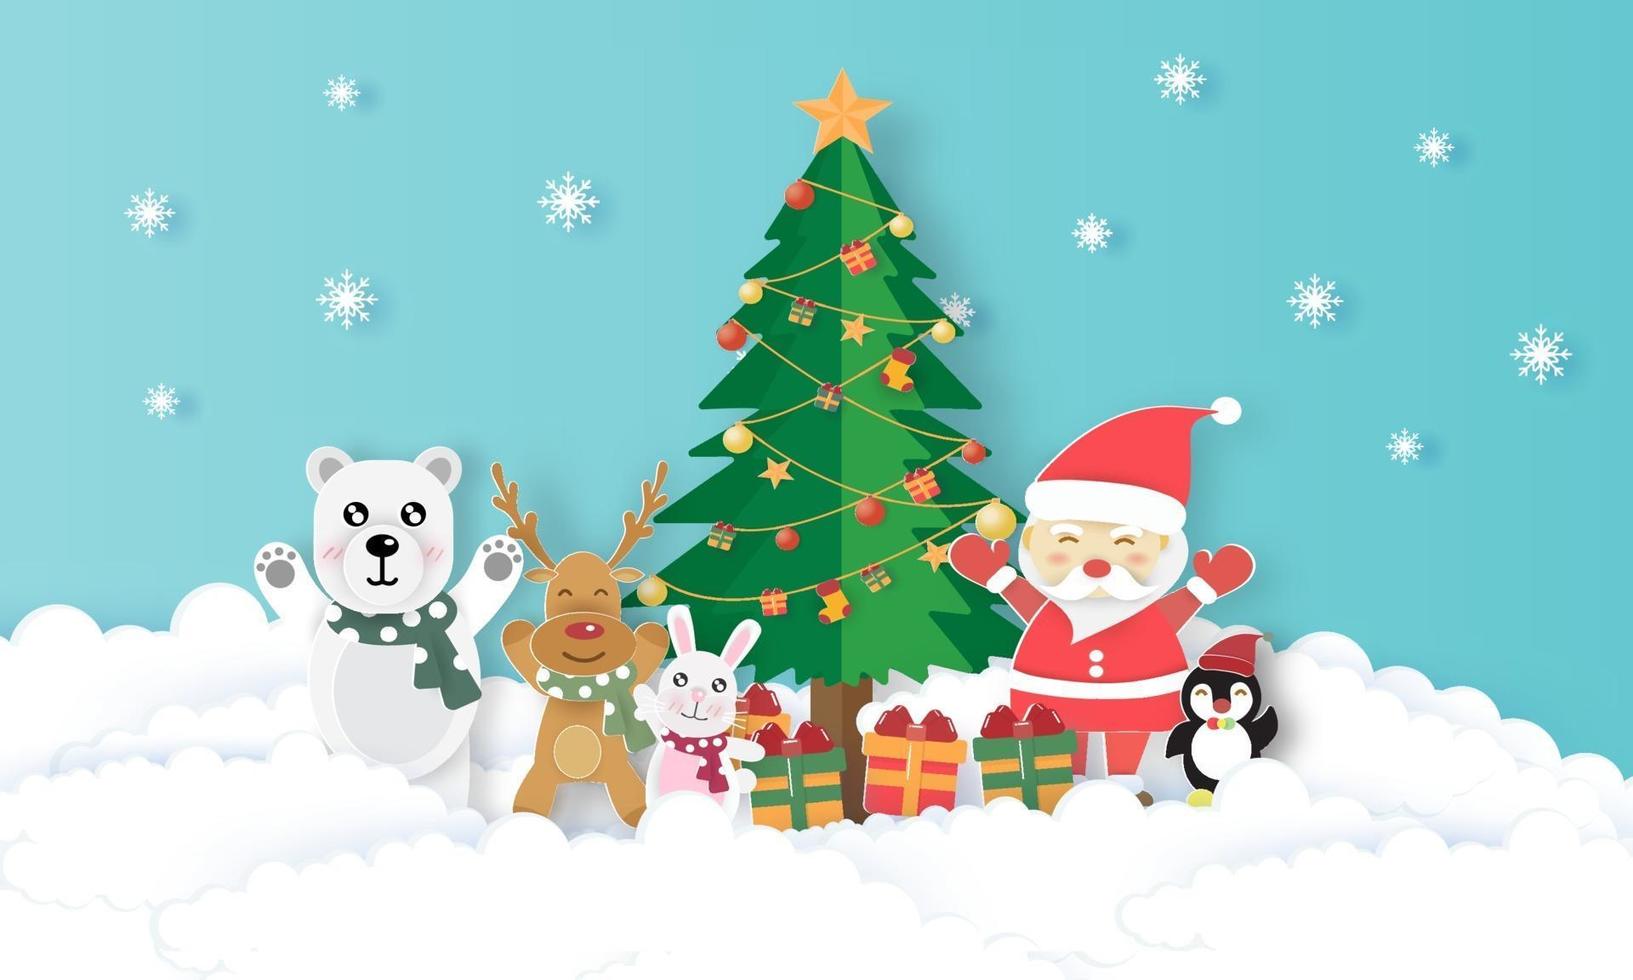 Christmas banner with a cute Santa clause and friends in paper cut